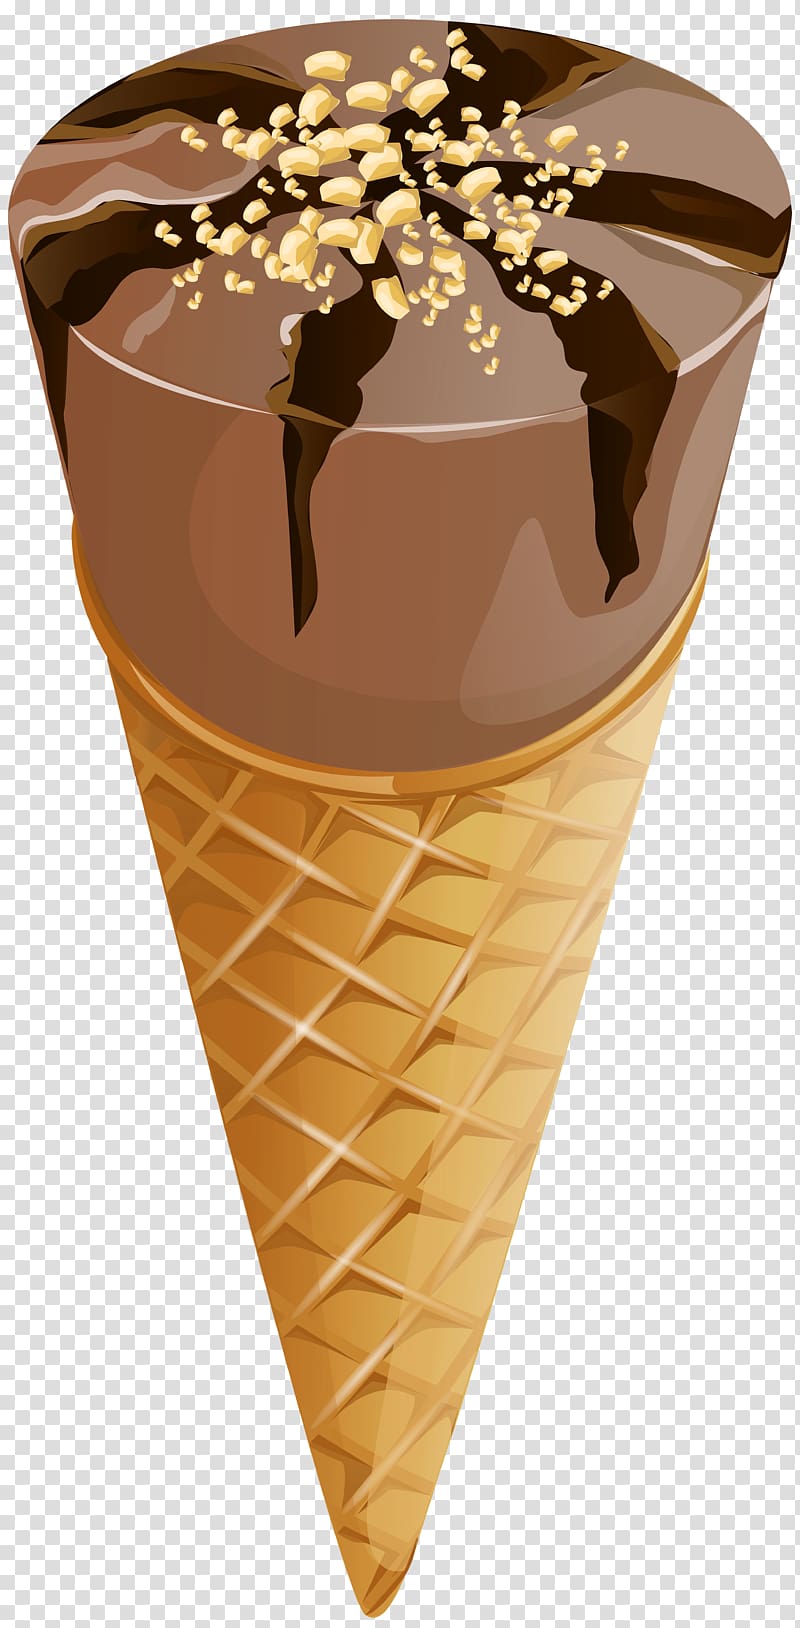 file formats Lossless compression, Chocolate Ice Cream transparent background PNG clipart